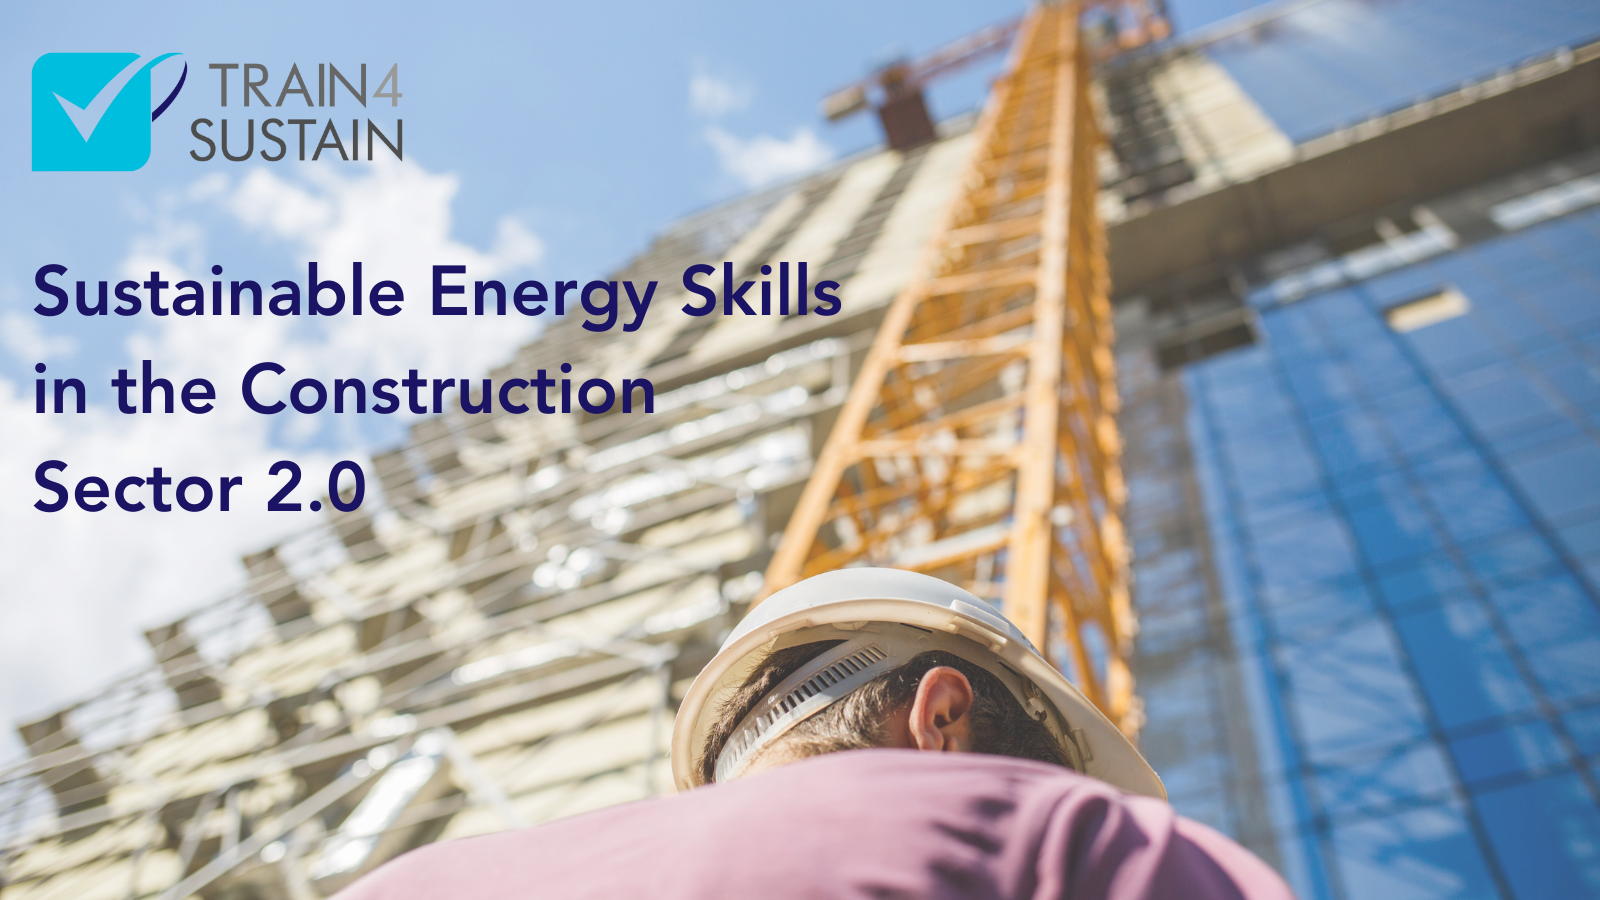 “Sustainable Energy Skills in the Construction Sector 2.0” publication out now!